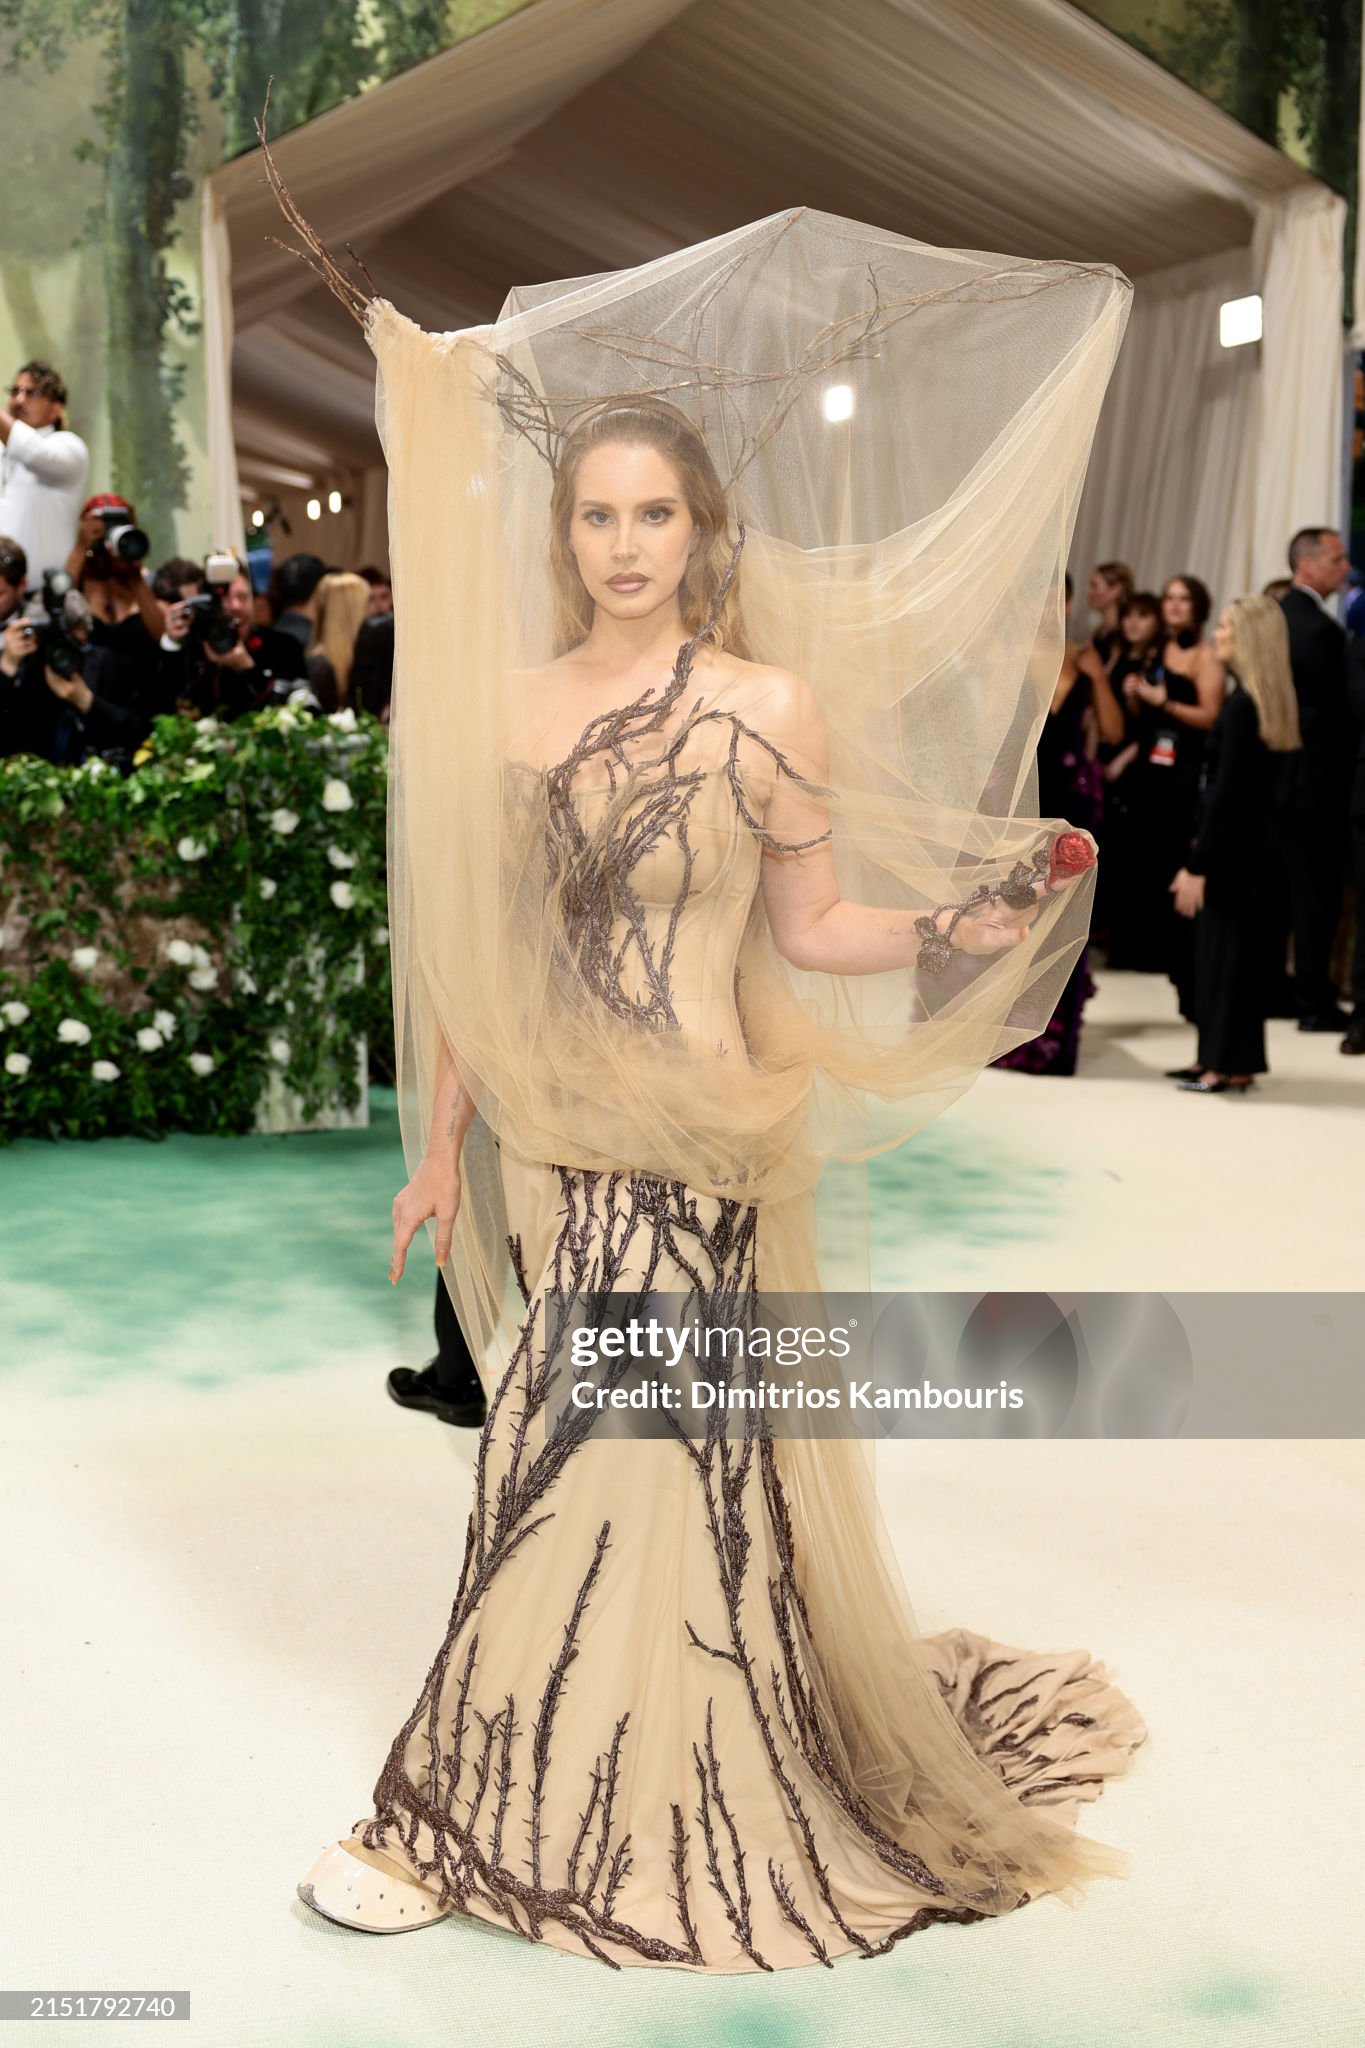 gettyimages-2151792740-2048x2048.jpg